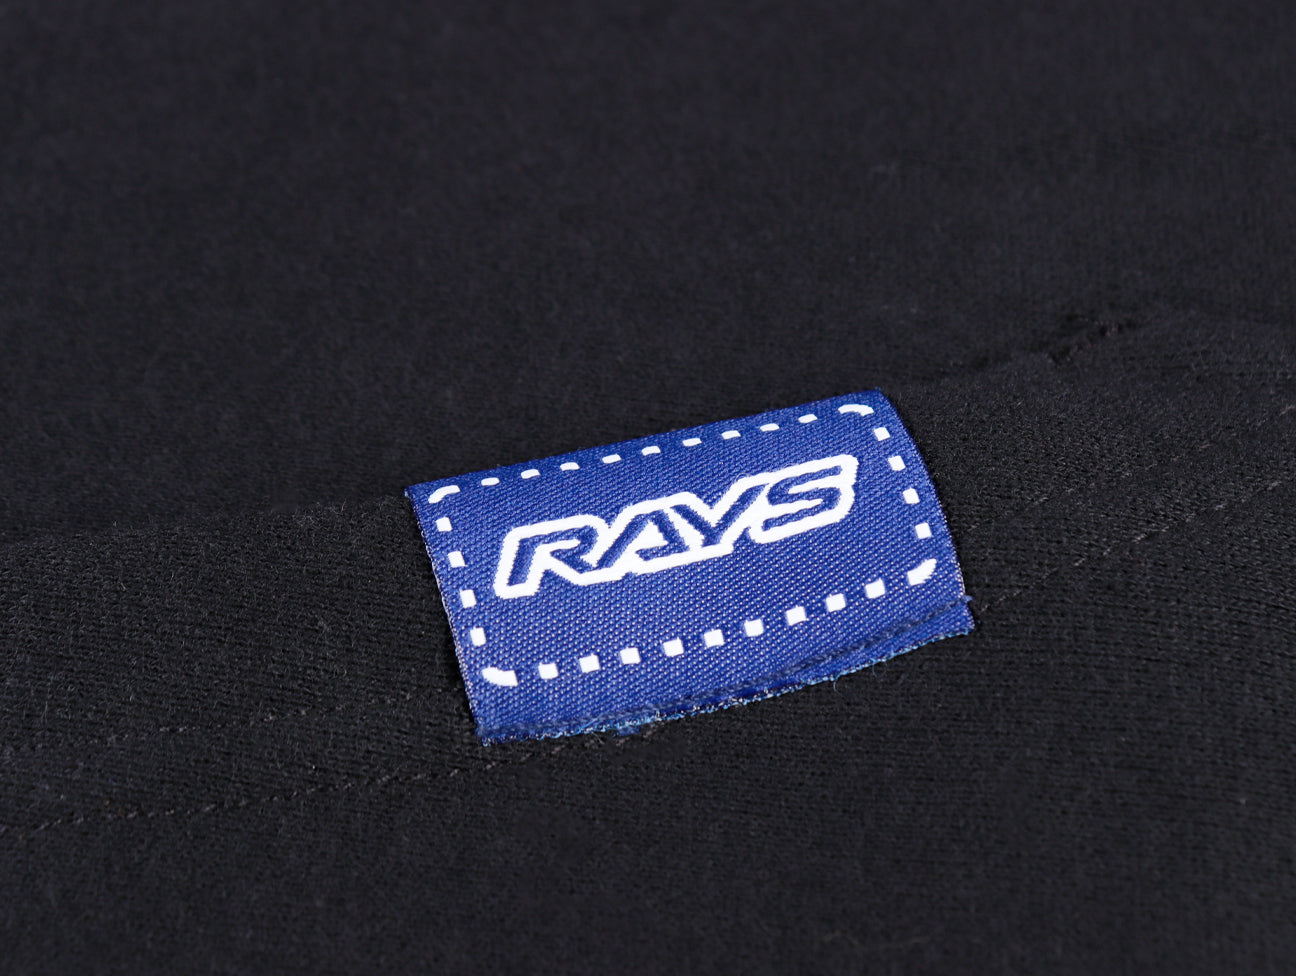 Rays "The Concept Is Racing" Pull Over Hoodie